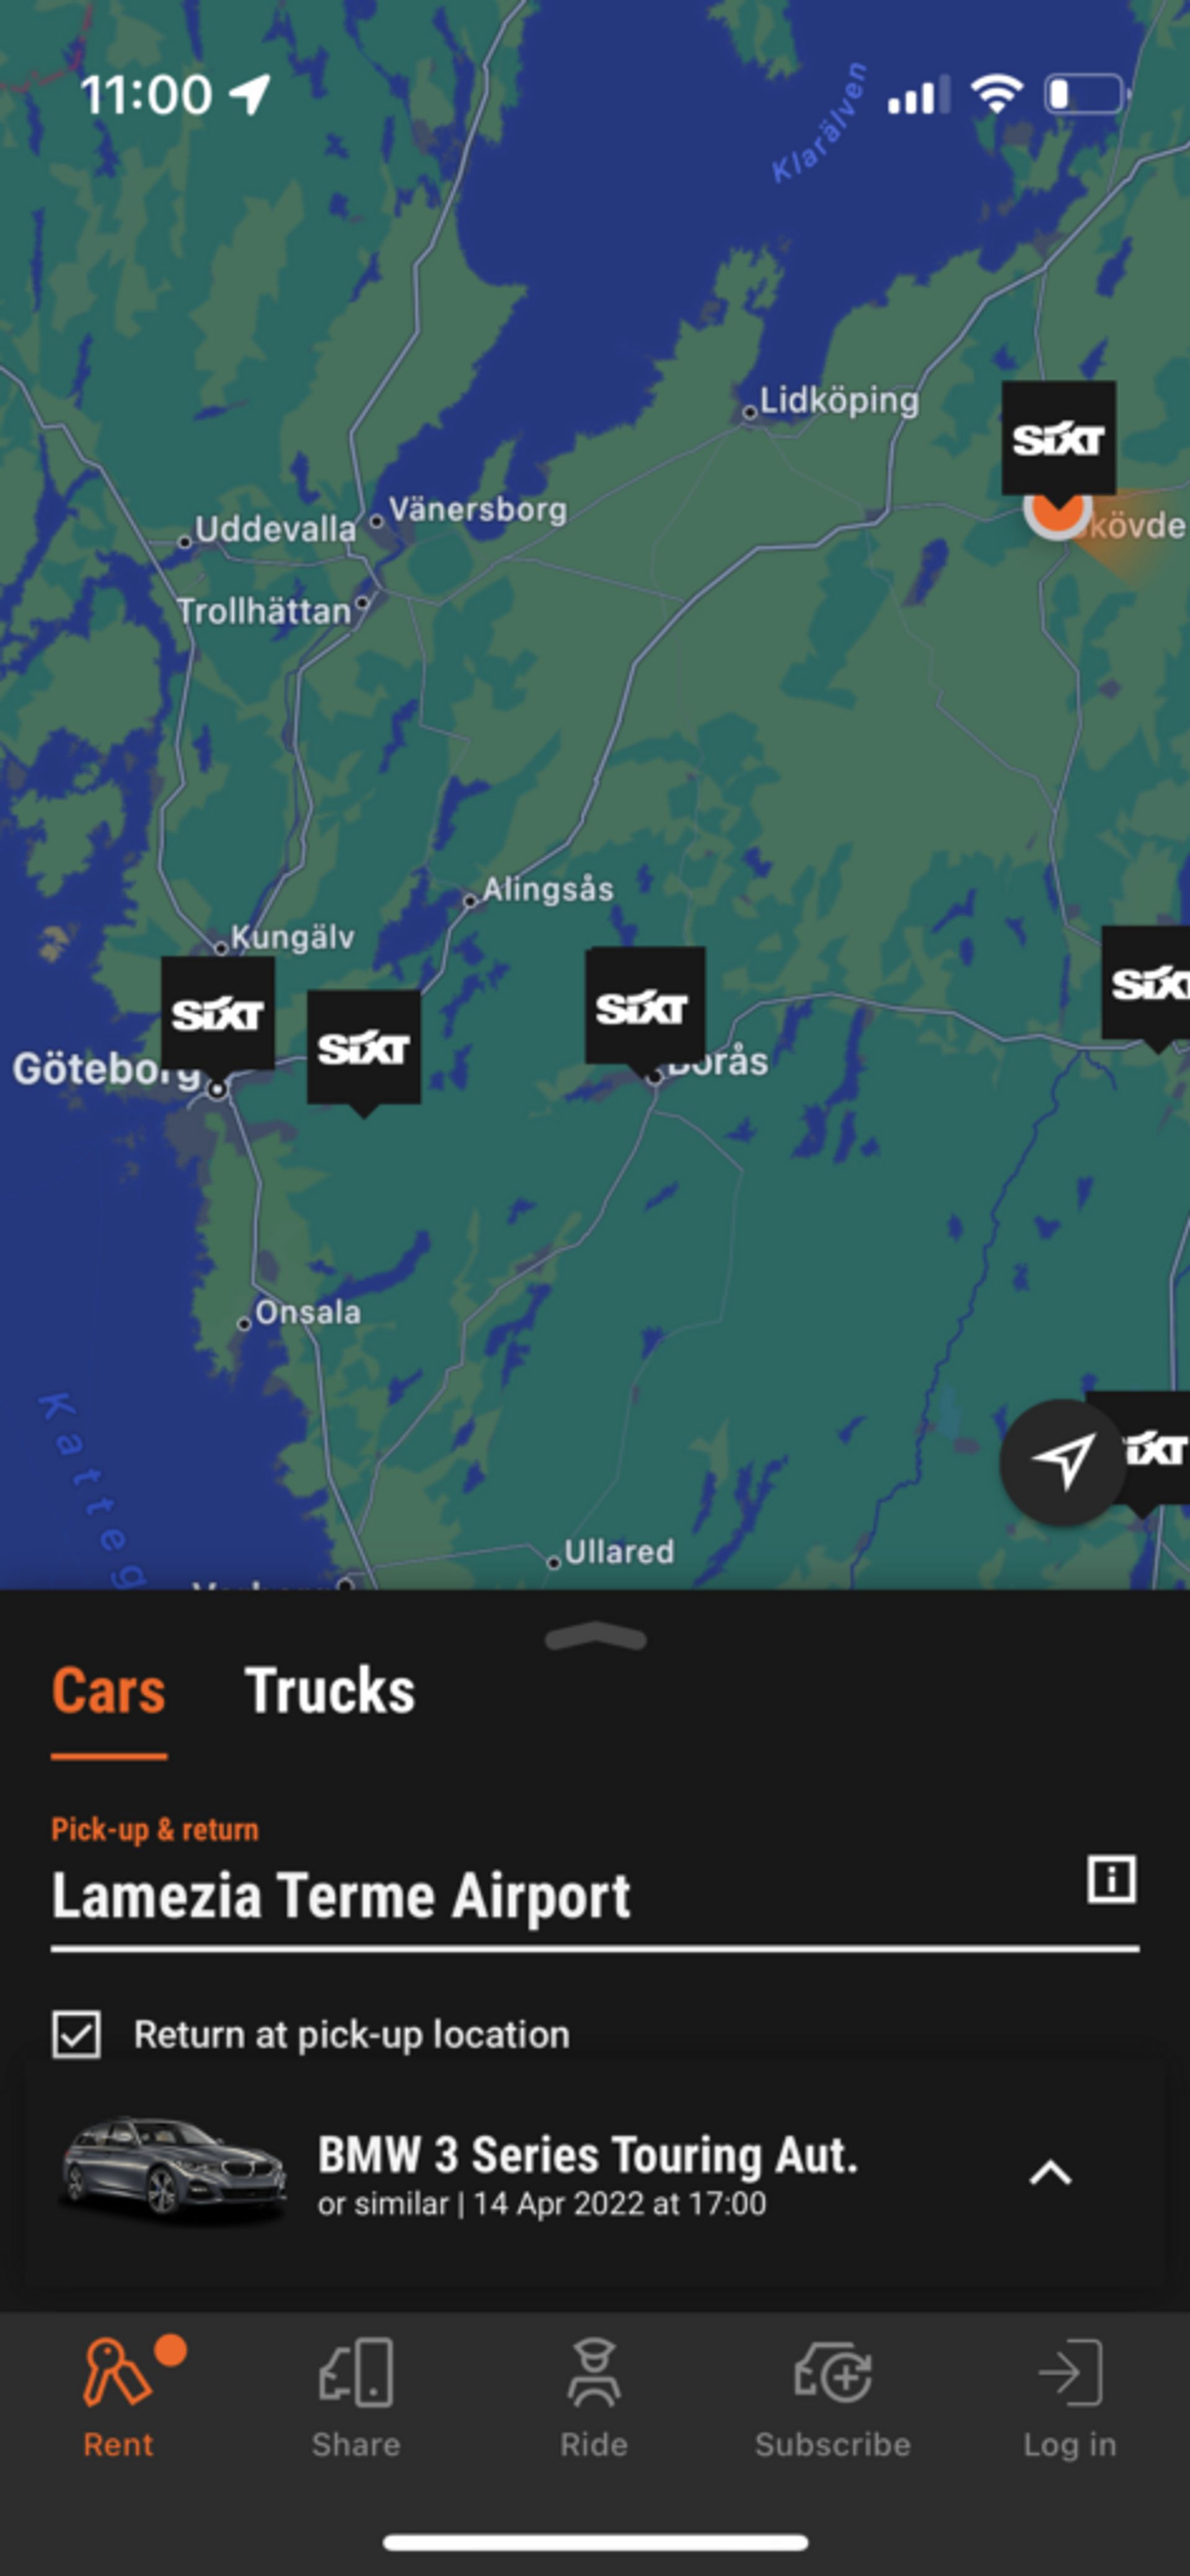 Screenshot of the Sixt app showing the possible pick-up and return locations on the map. 